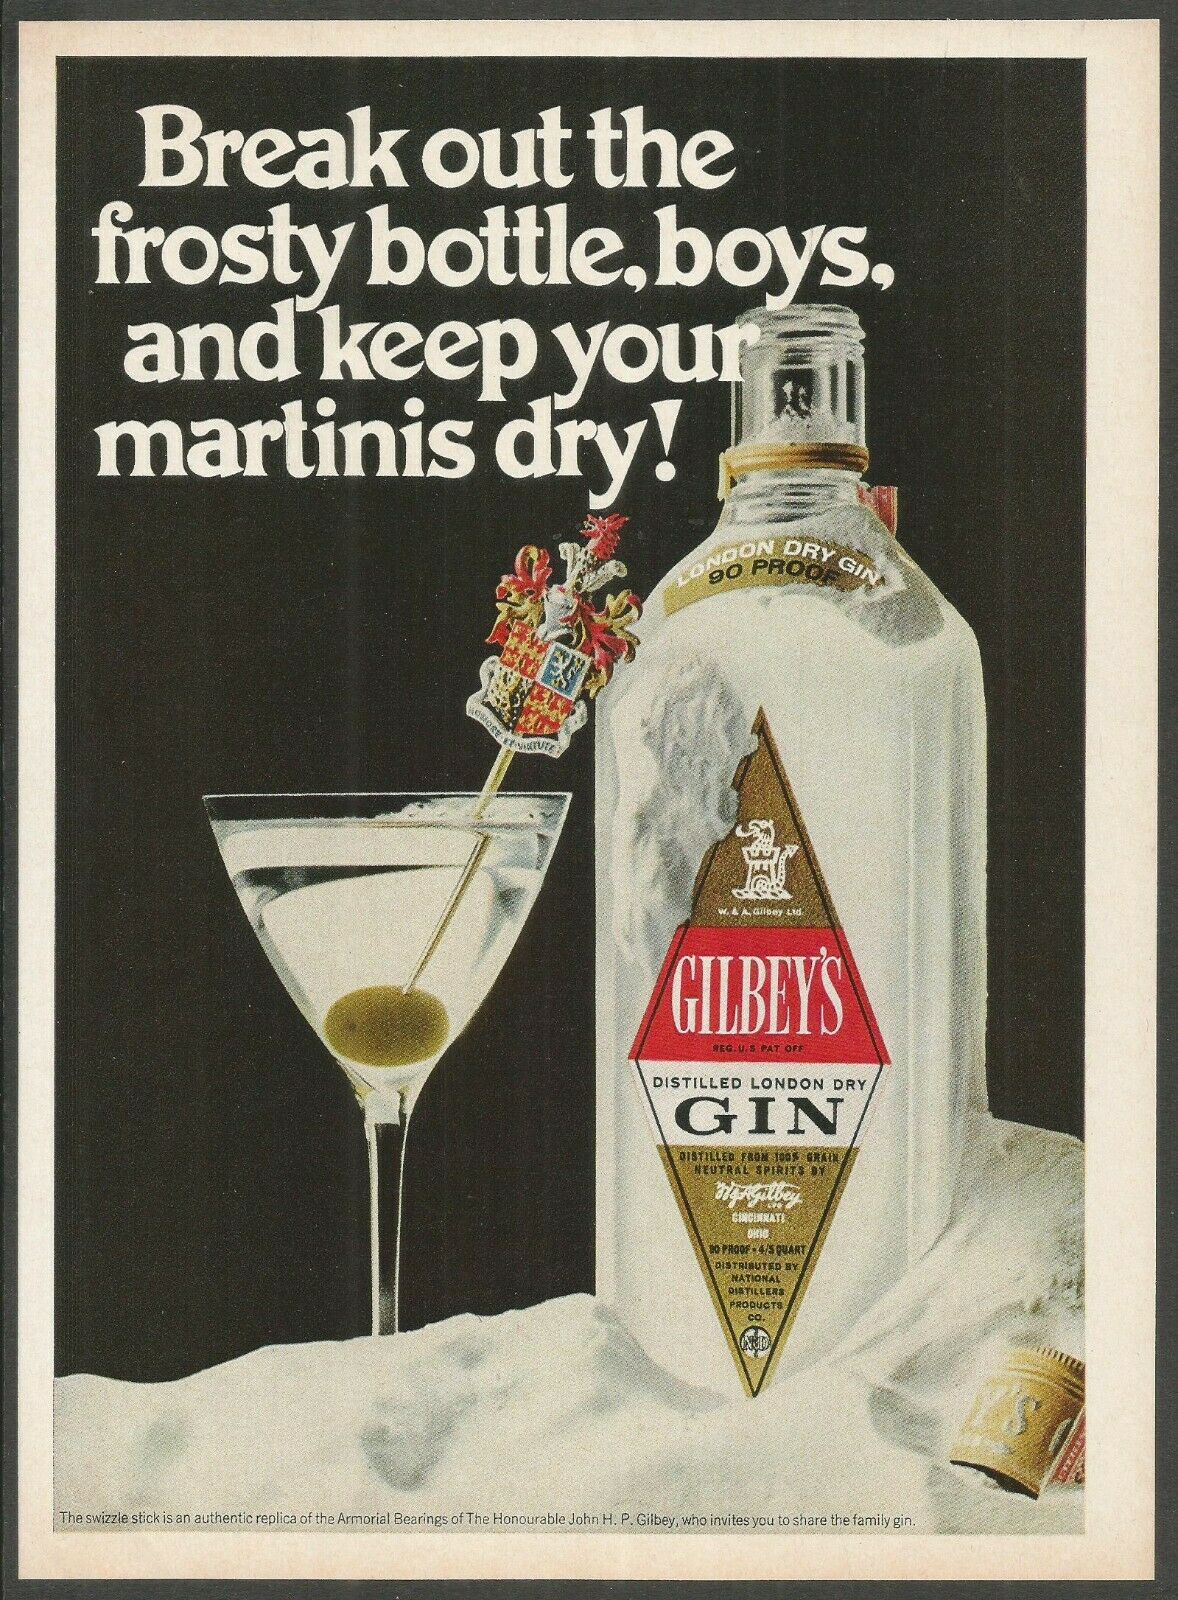 Gilbey's London Dry Gin - Keep Your Martinis Dry - 1968 Vintage Print Ad